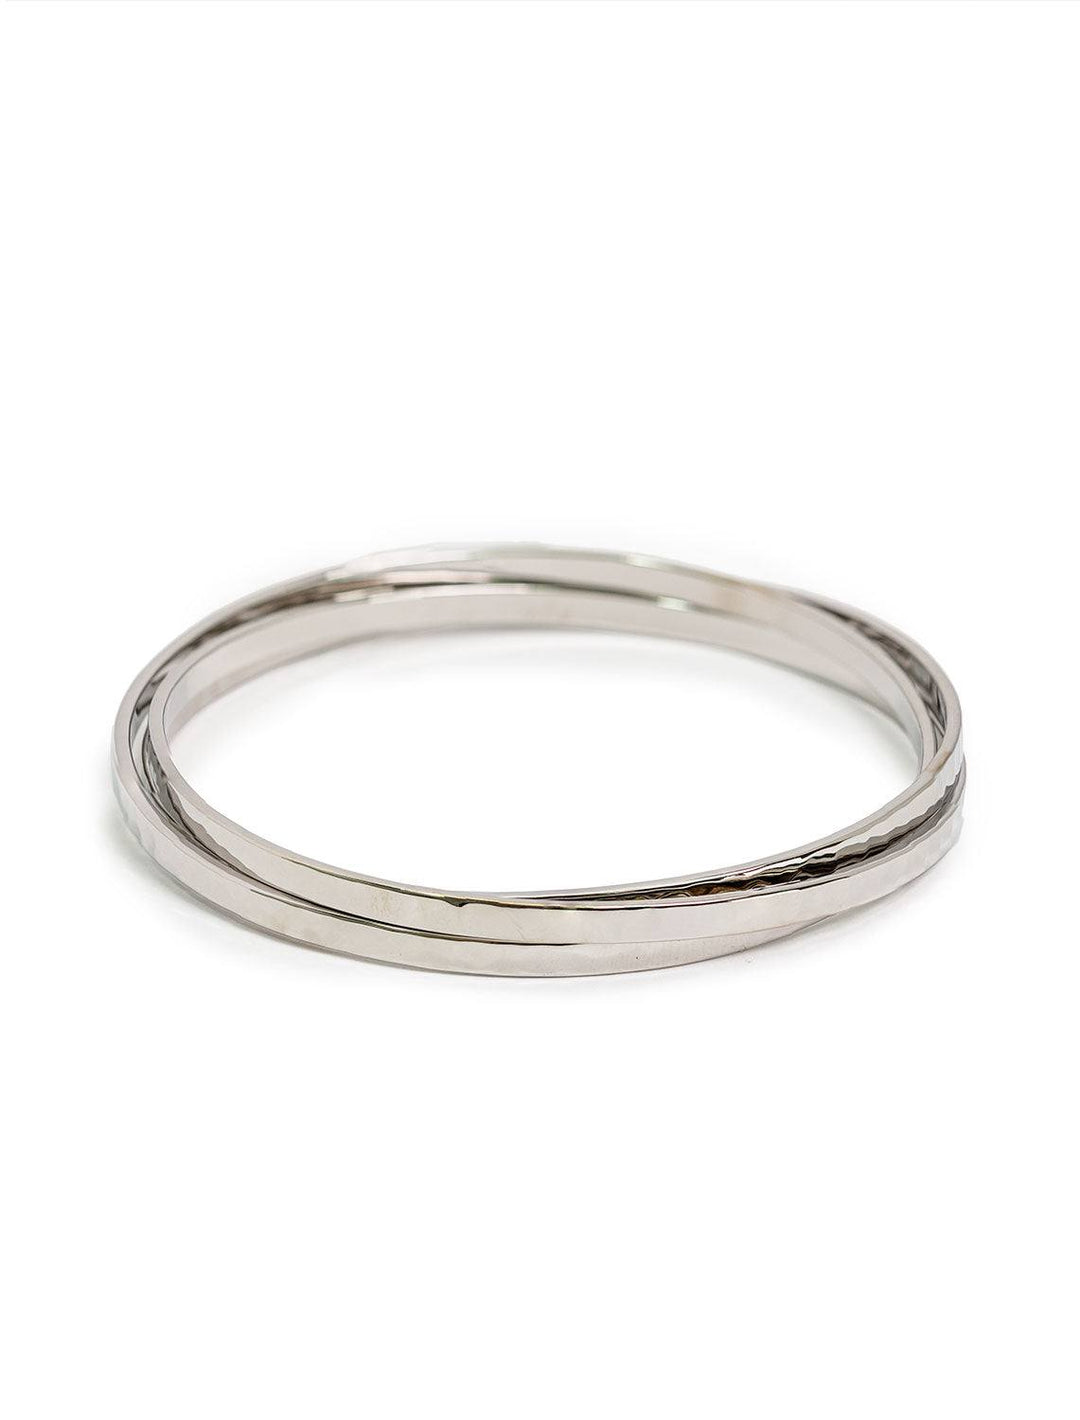 front view of medium hammered bangle set in silver